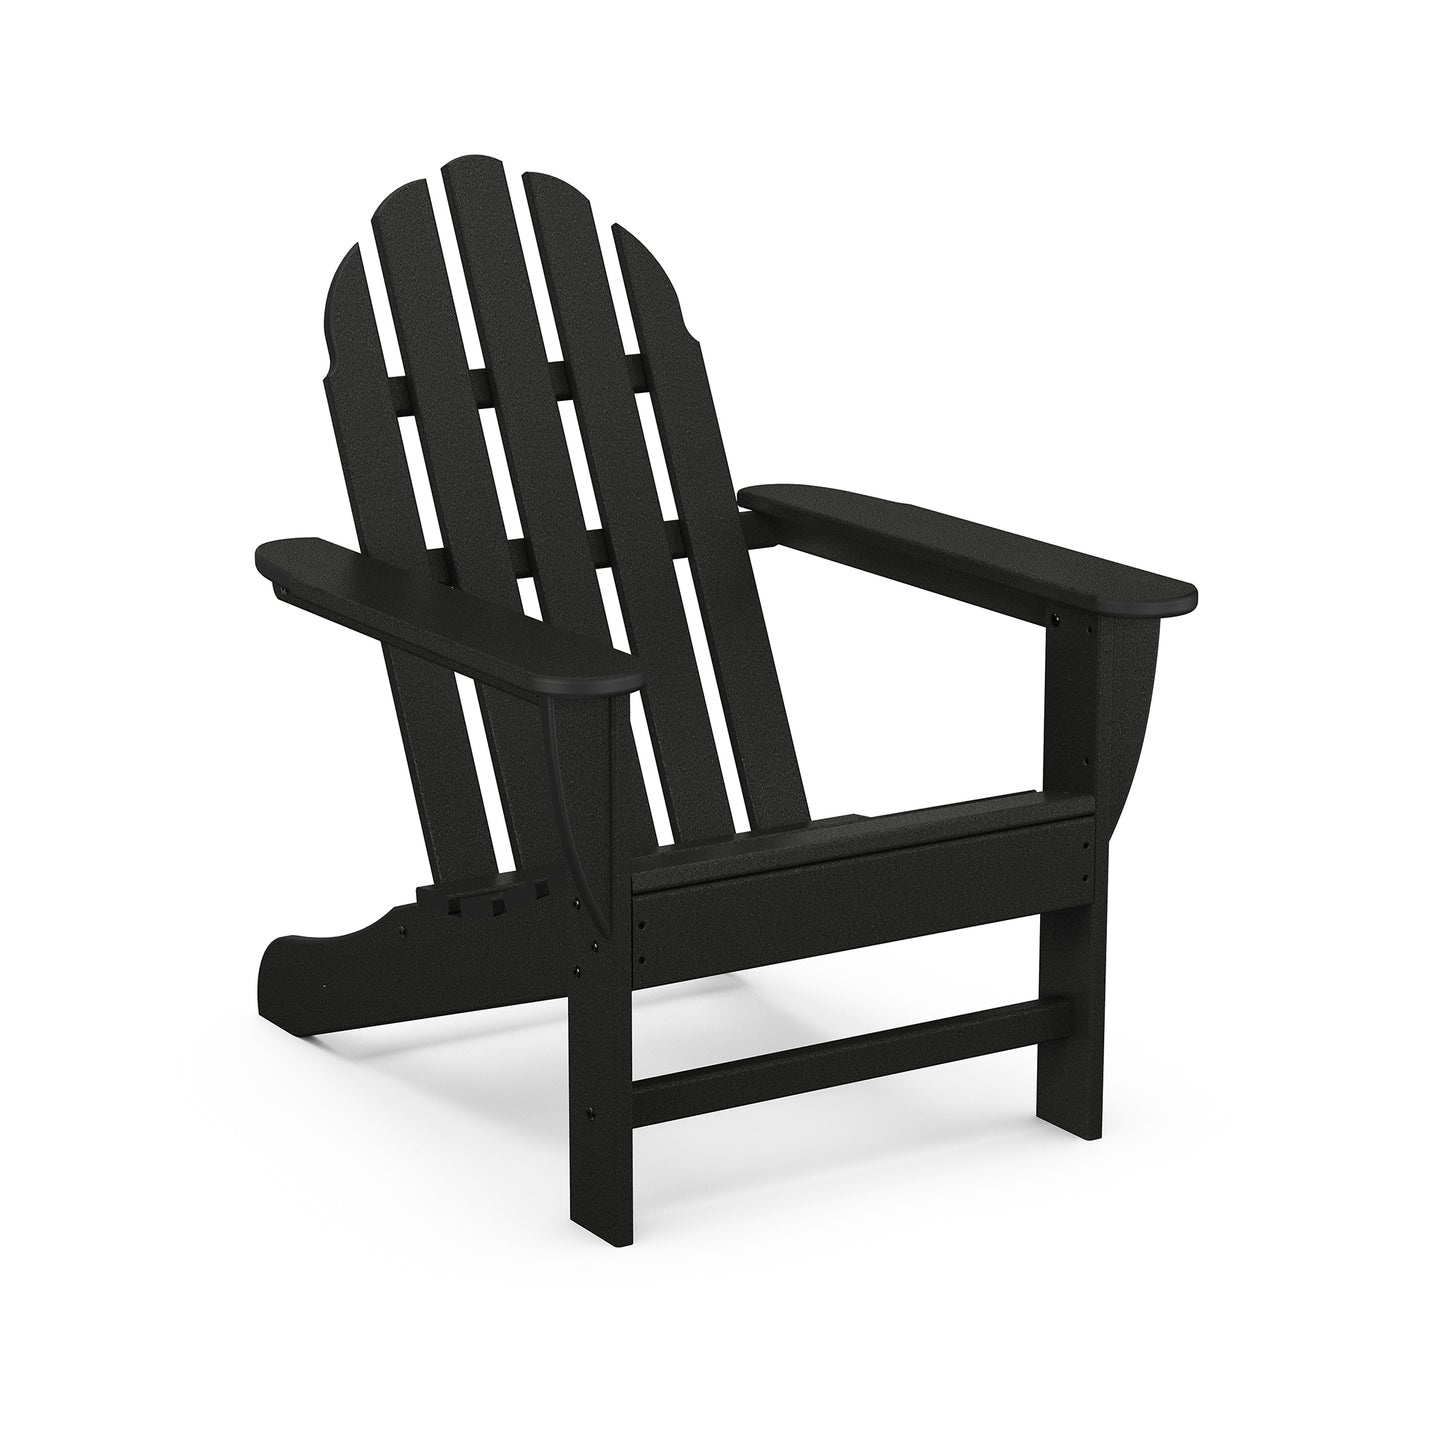 Sentence with replaced product:
A black POLYWOOD Classic Adirondack Chair with a high back and flat armrests, presented against a white background. The chair is sturdy with a slightly reclined back and slatted.